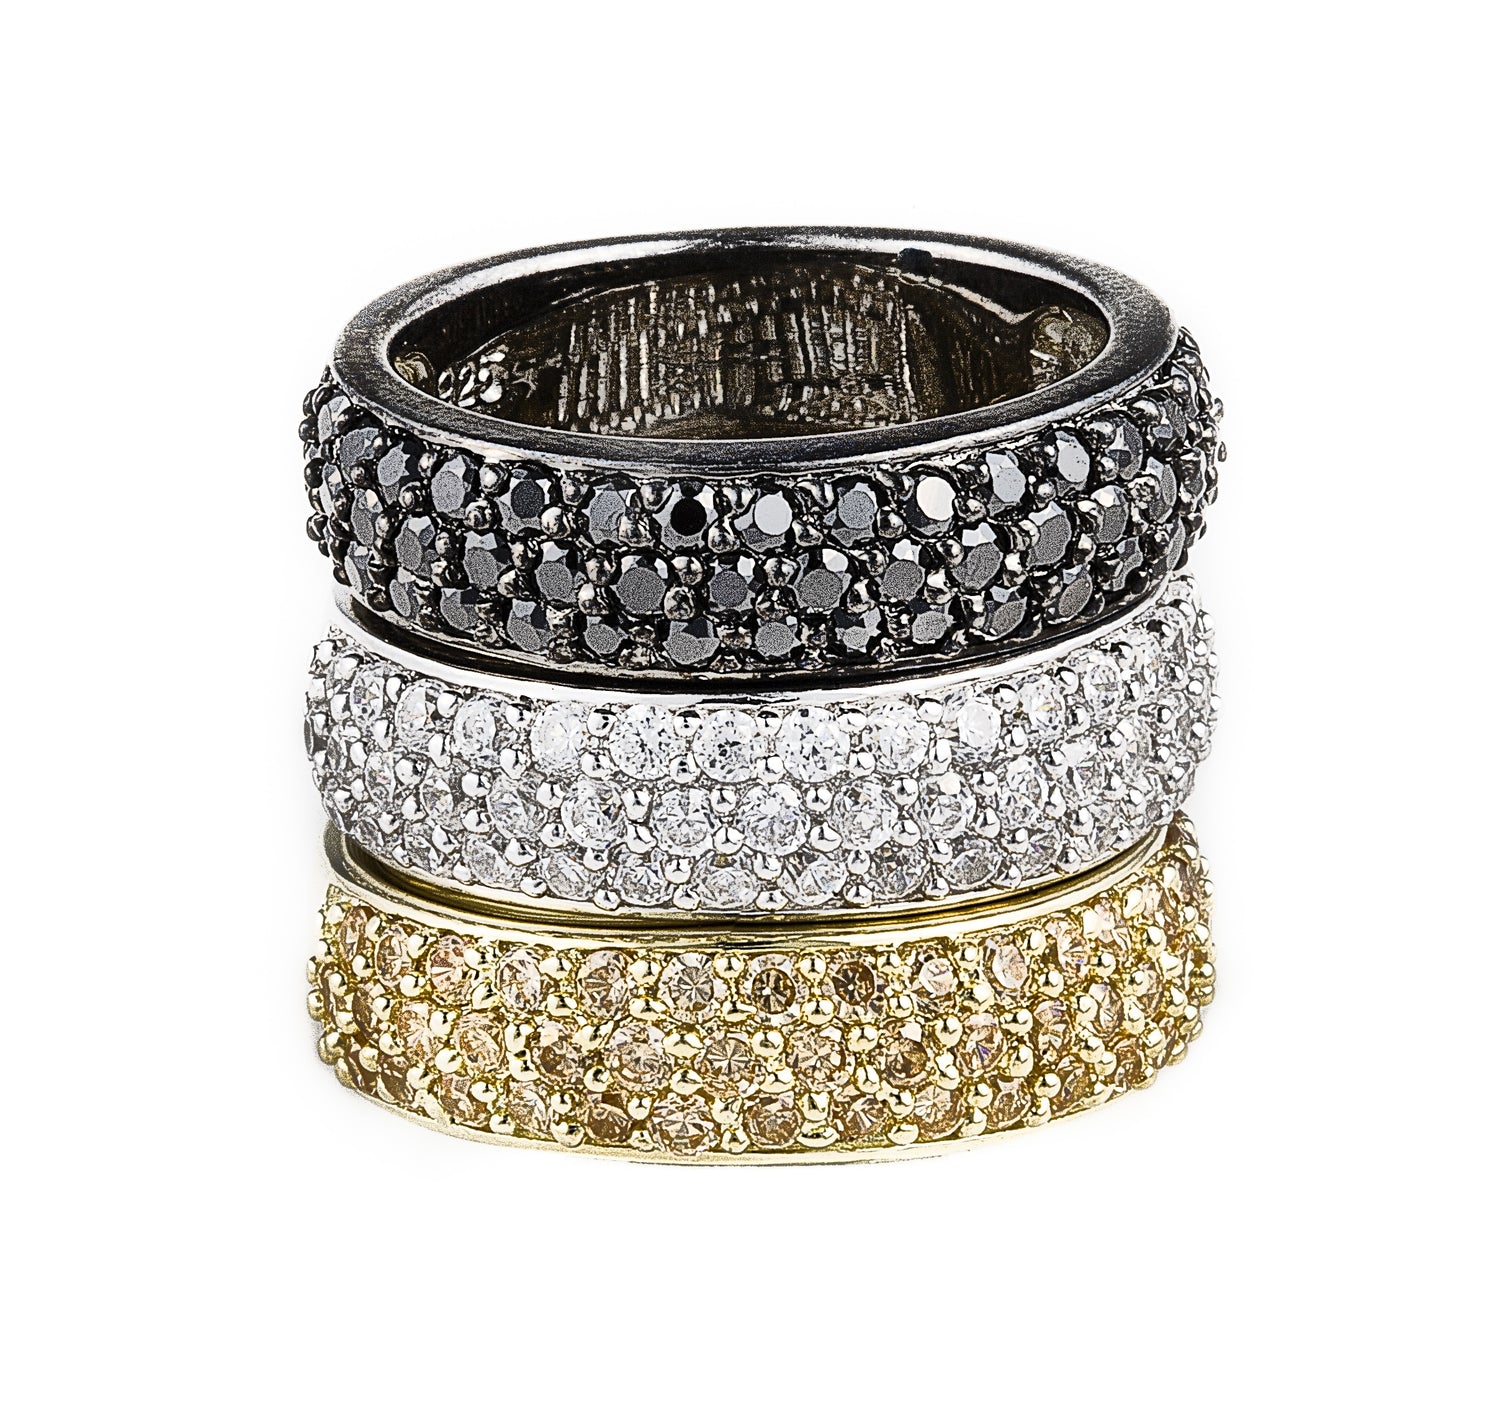 Omega Diva Rings. Set of 3 separate bands in 925 sterling silver, all with a pavé setting featuring clear, black or champagne cubic zirconia stones. Shop rings & affordable luxury jewellery by Bellagio & Co. Worldwide shipping